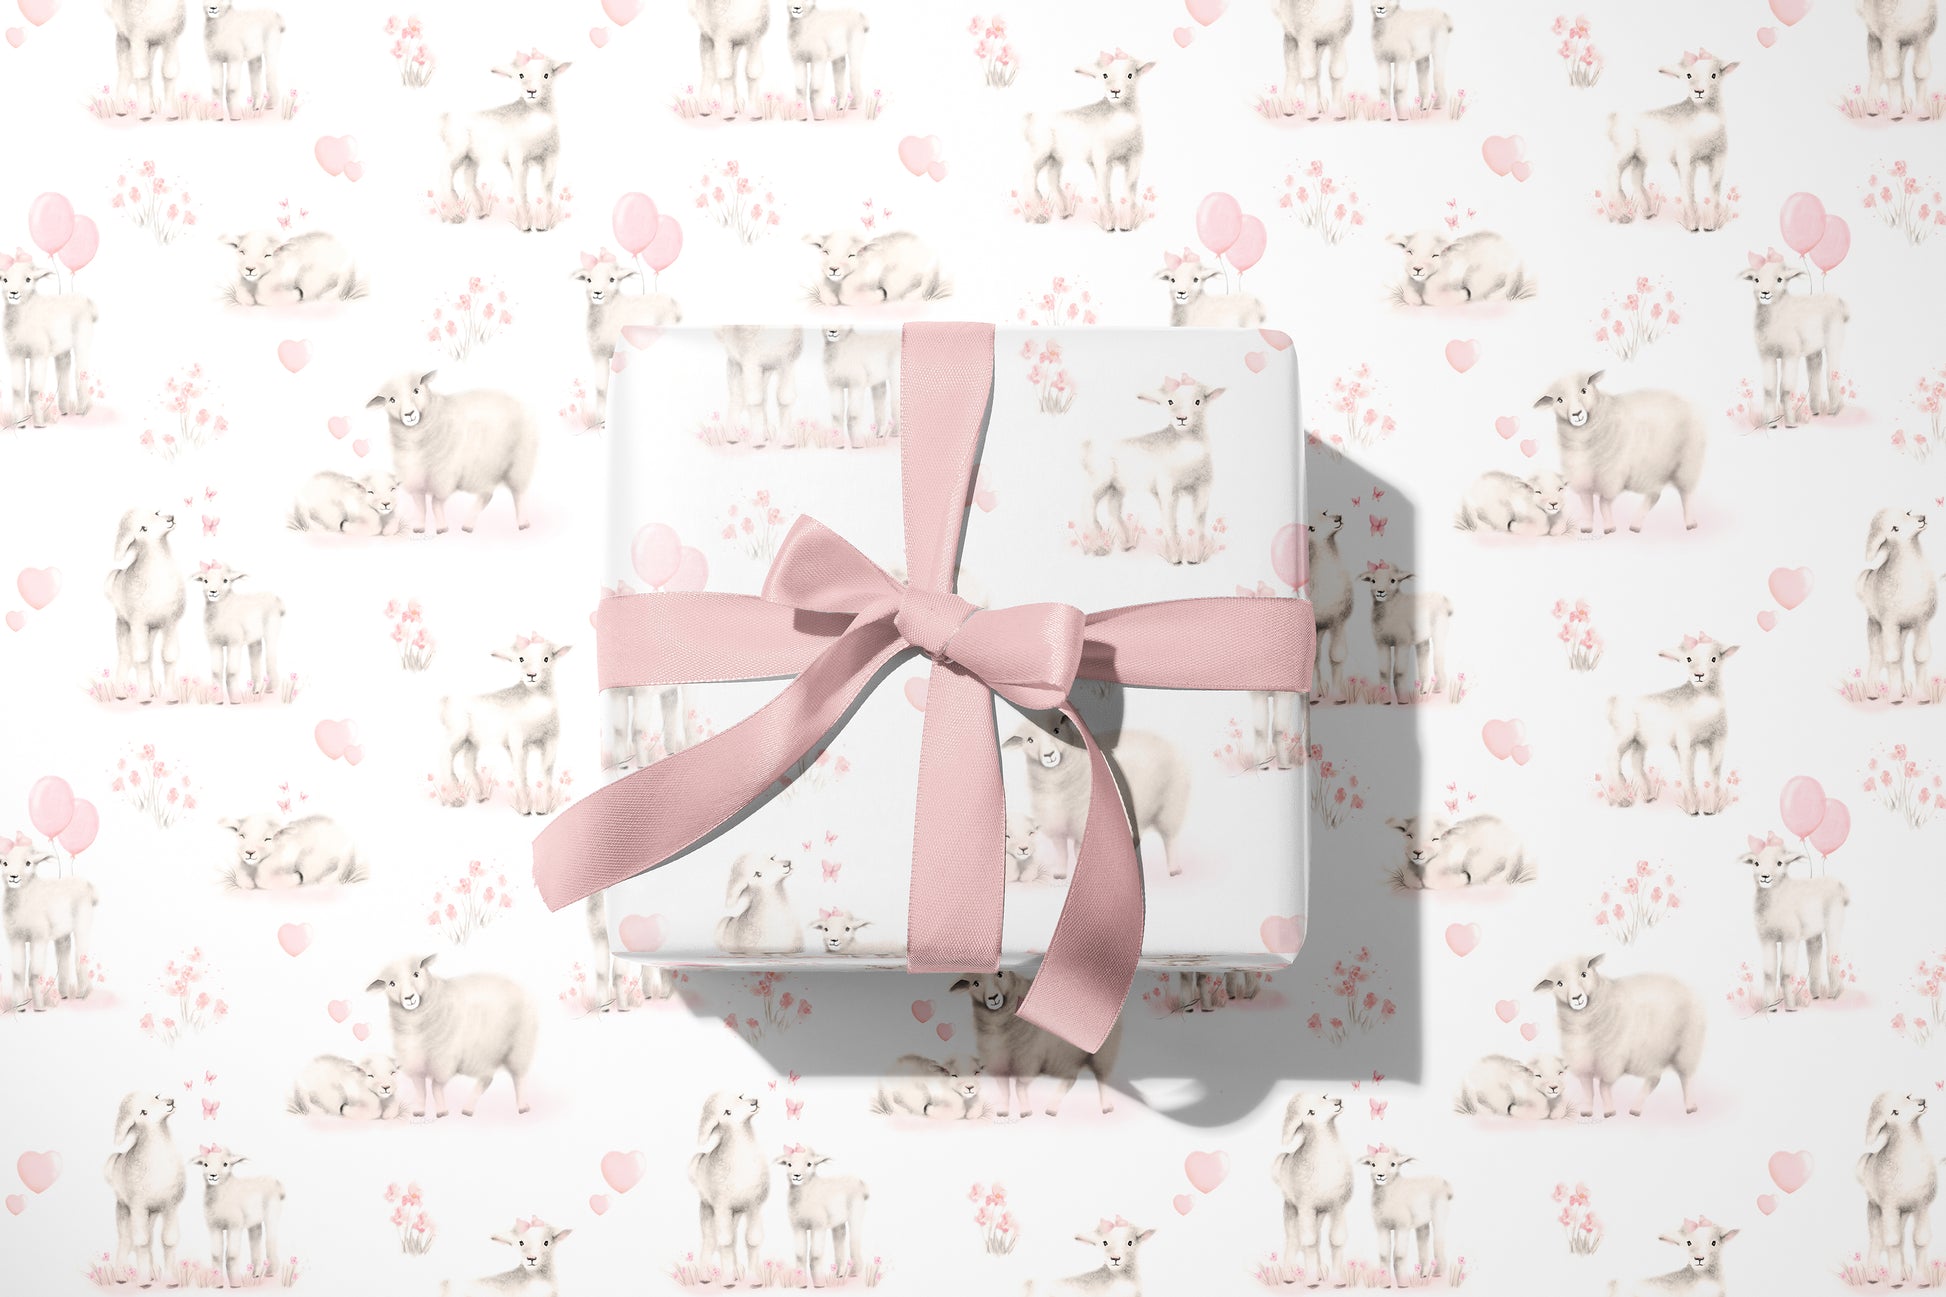 Baby Lamb and Sheep Wrapping Paper - Studio Q - Art by Nicky Quartermaine Scott